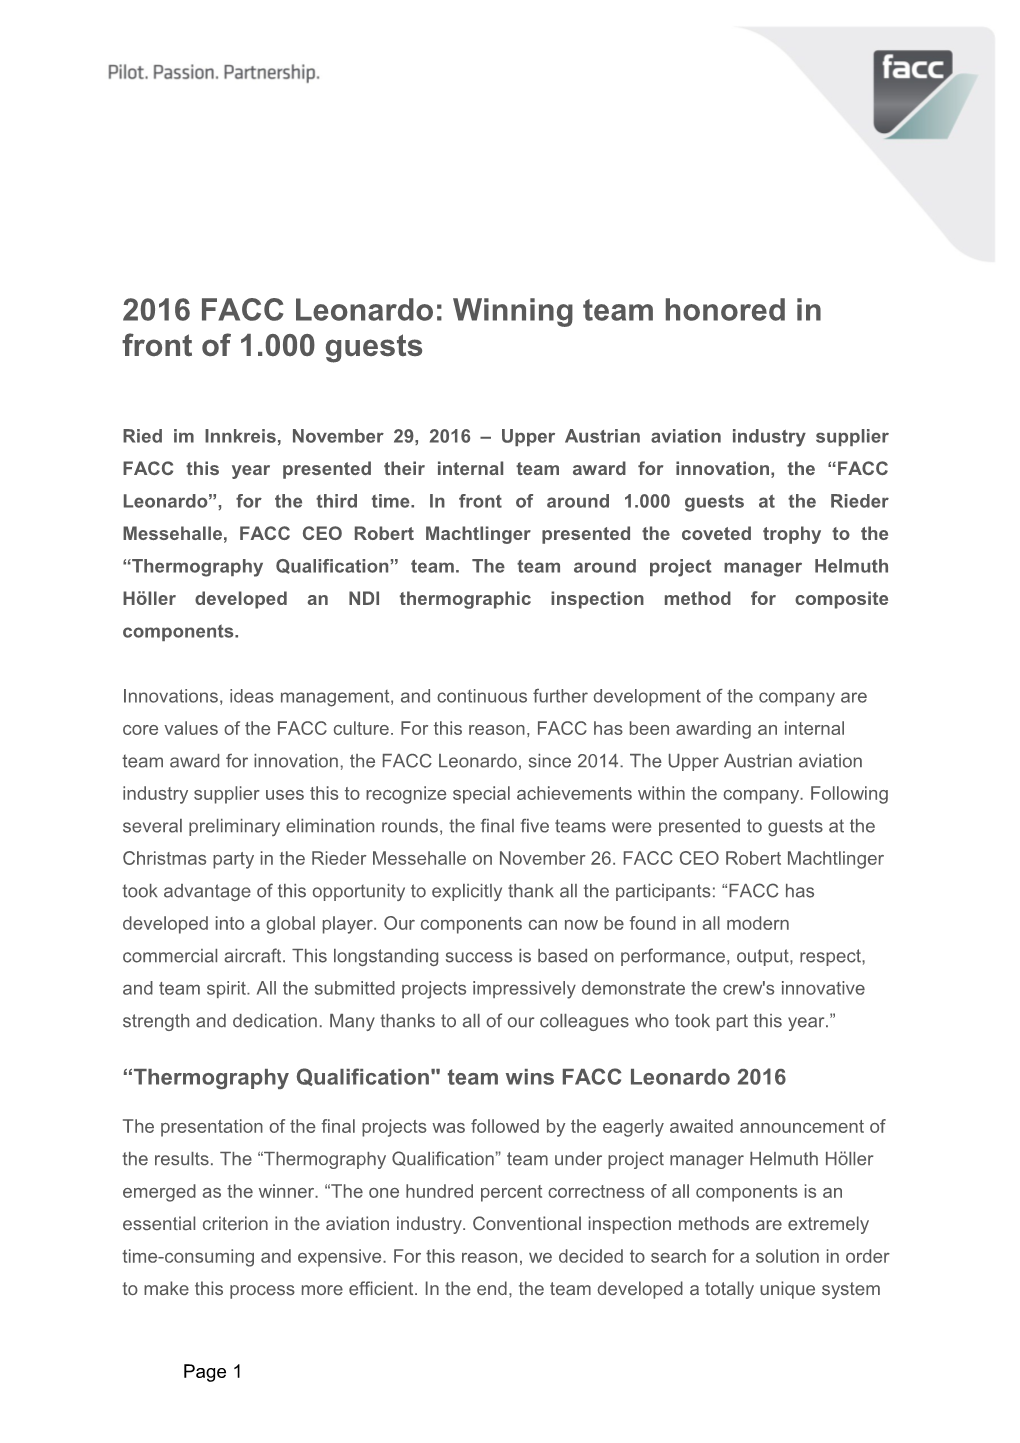 2016 FACC Leonardo: Winning Team Honored in Front Of1.000 Guests